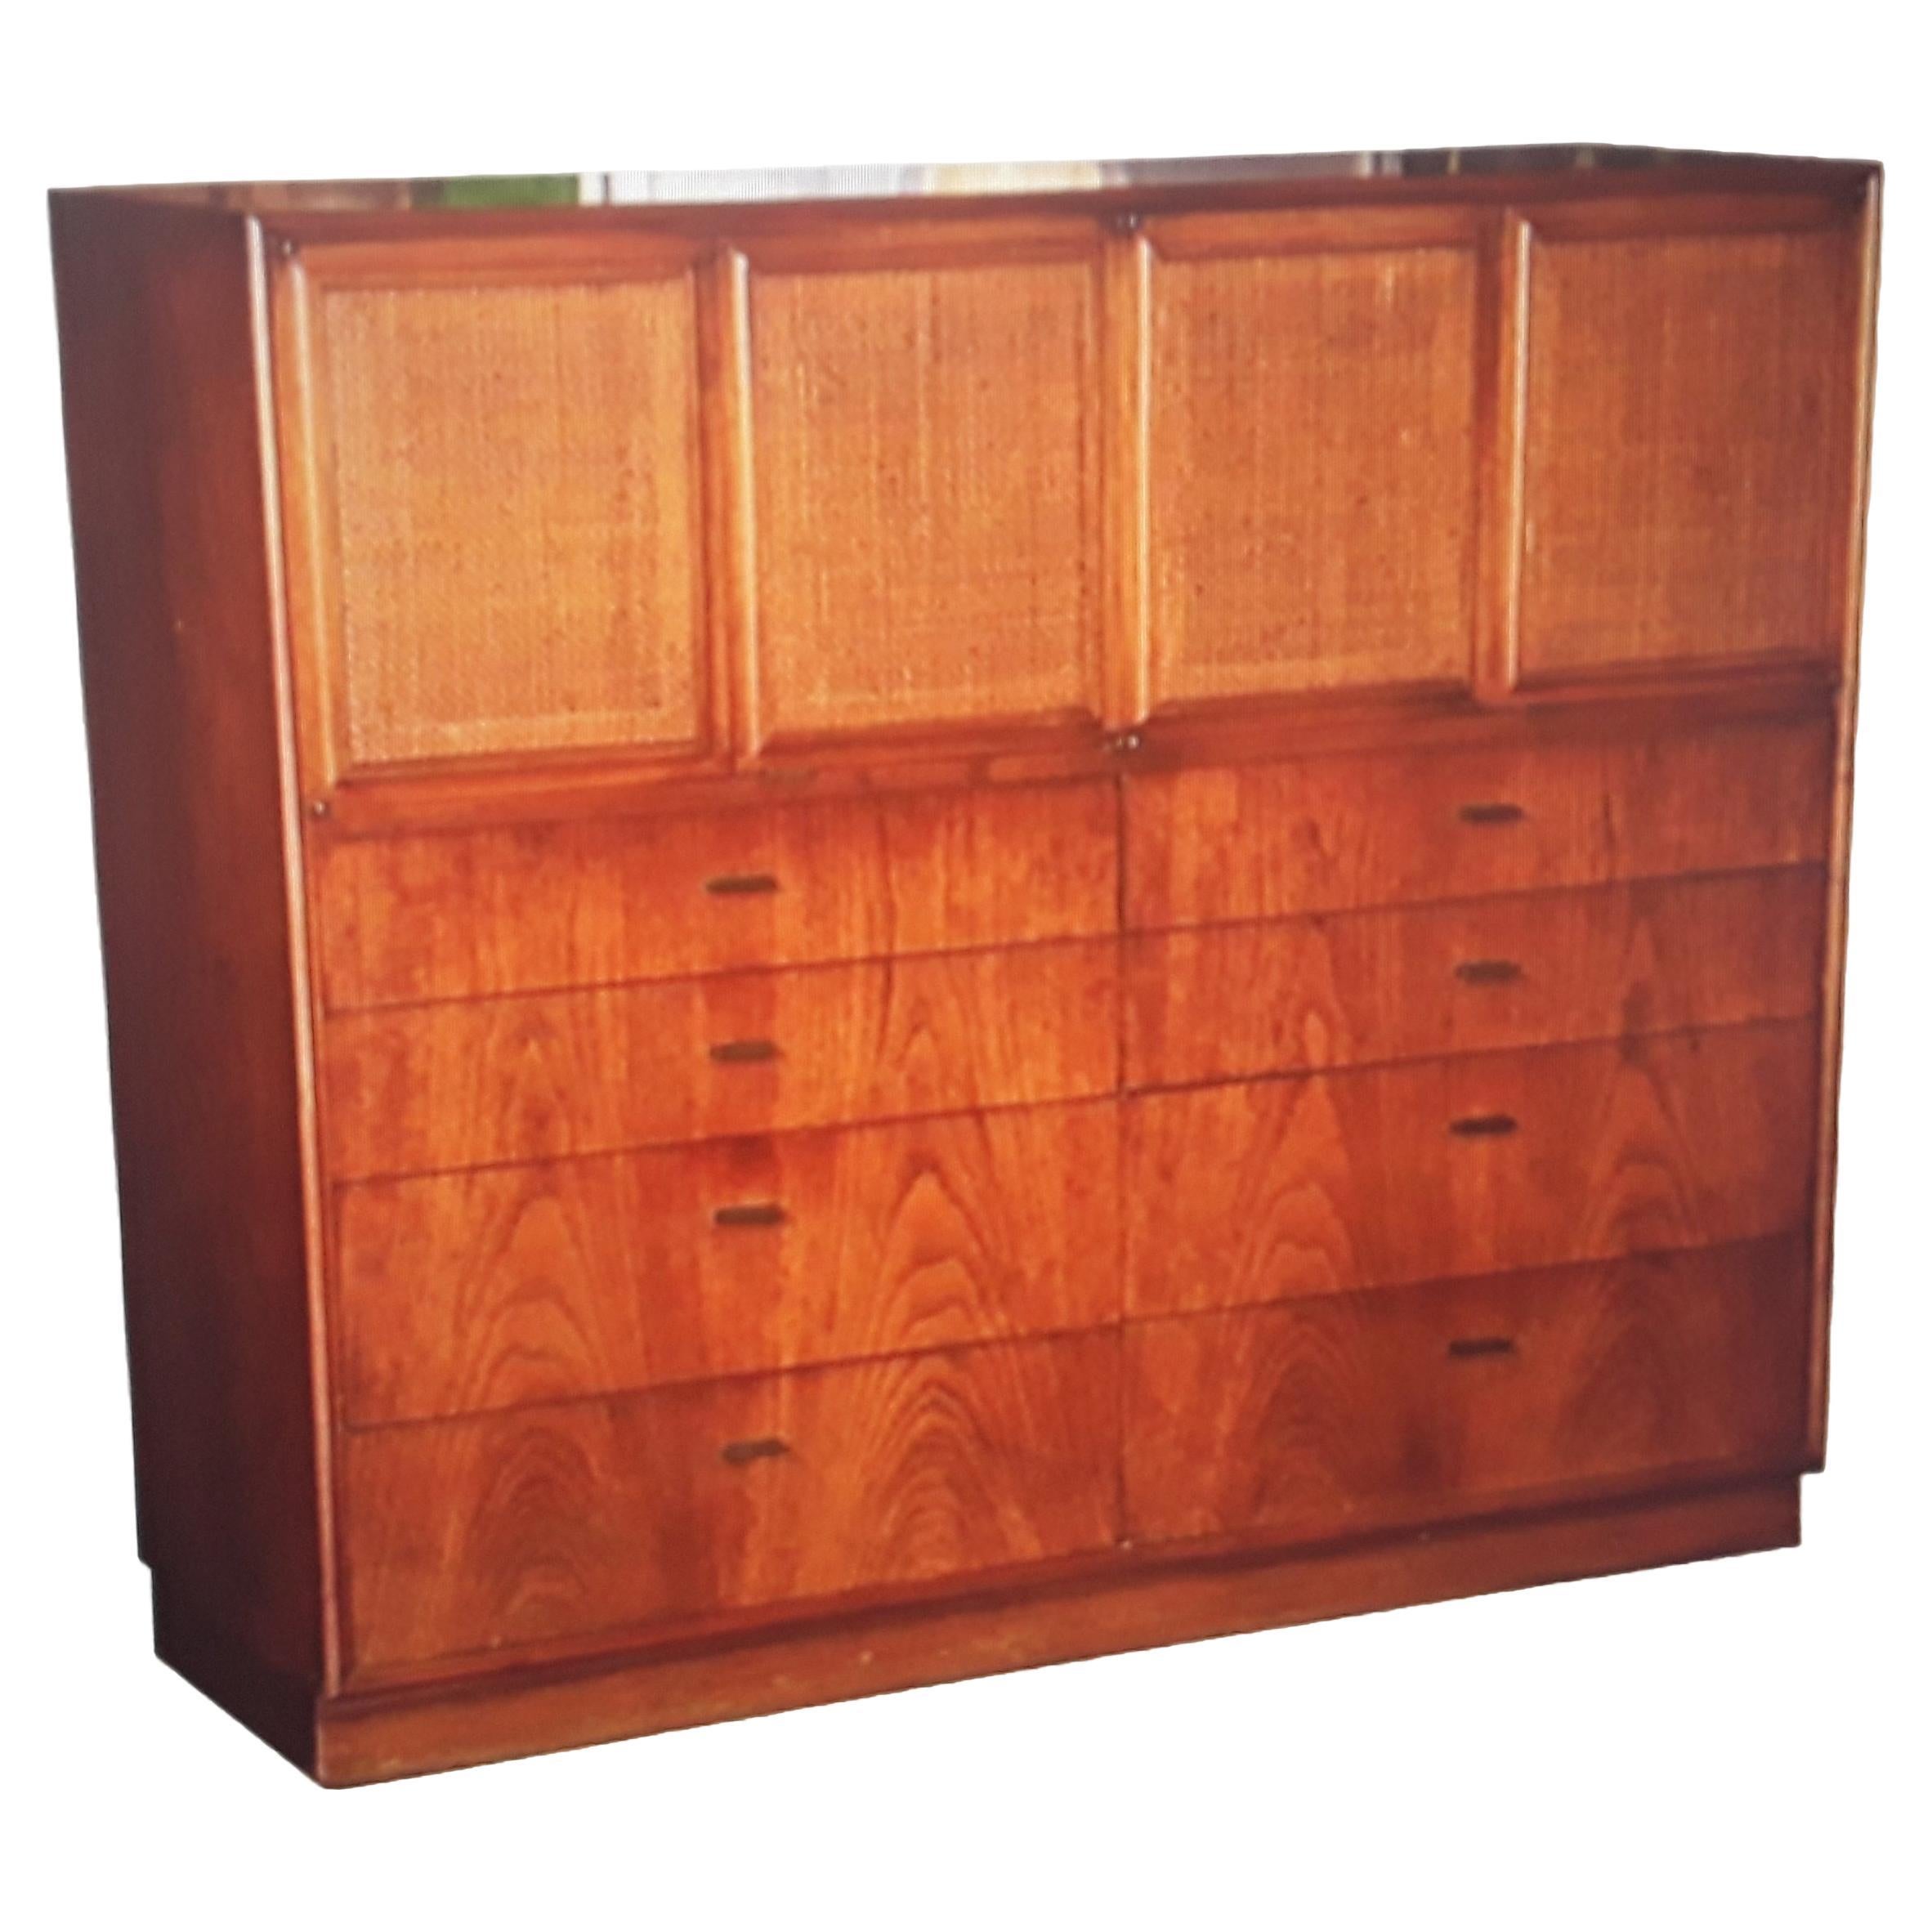 1960's Mid Century Modern Walnut Chest of Drawers with 4 Caned Panels